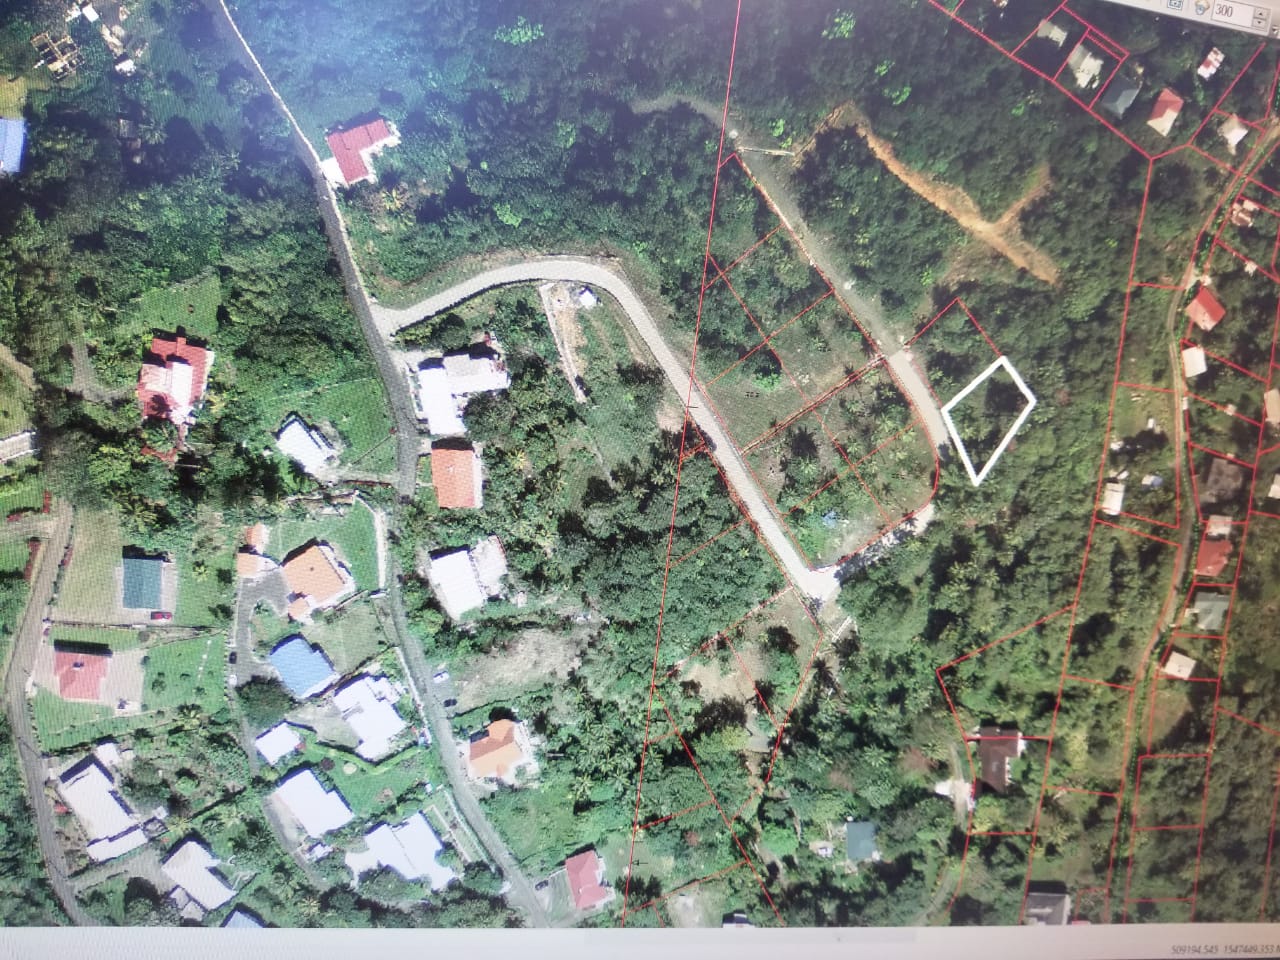 Residential lot at Morne Fortune, Castries St Lucia